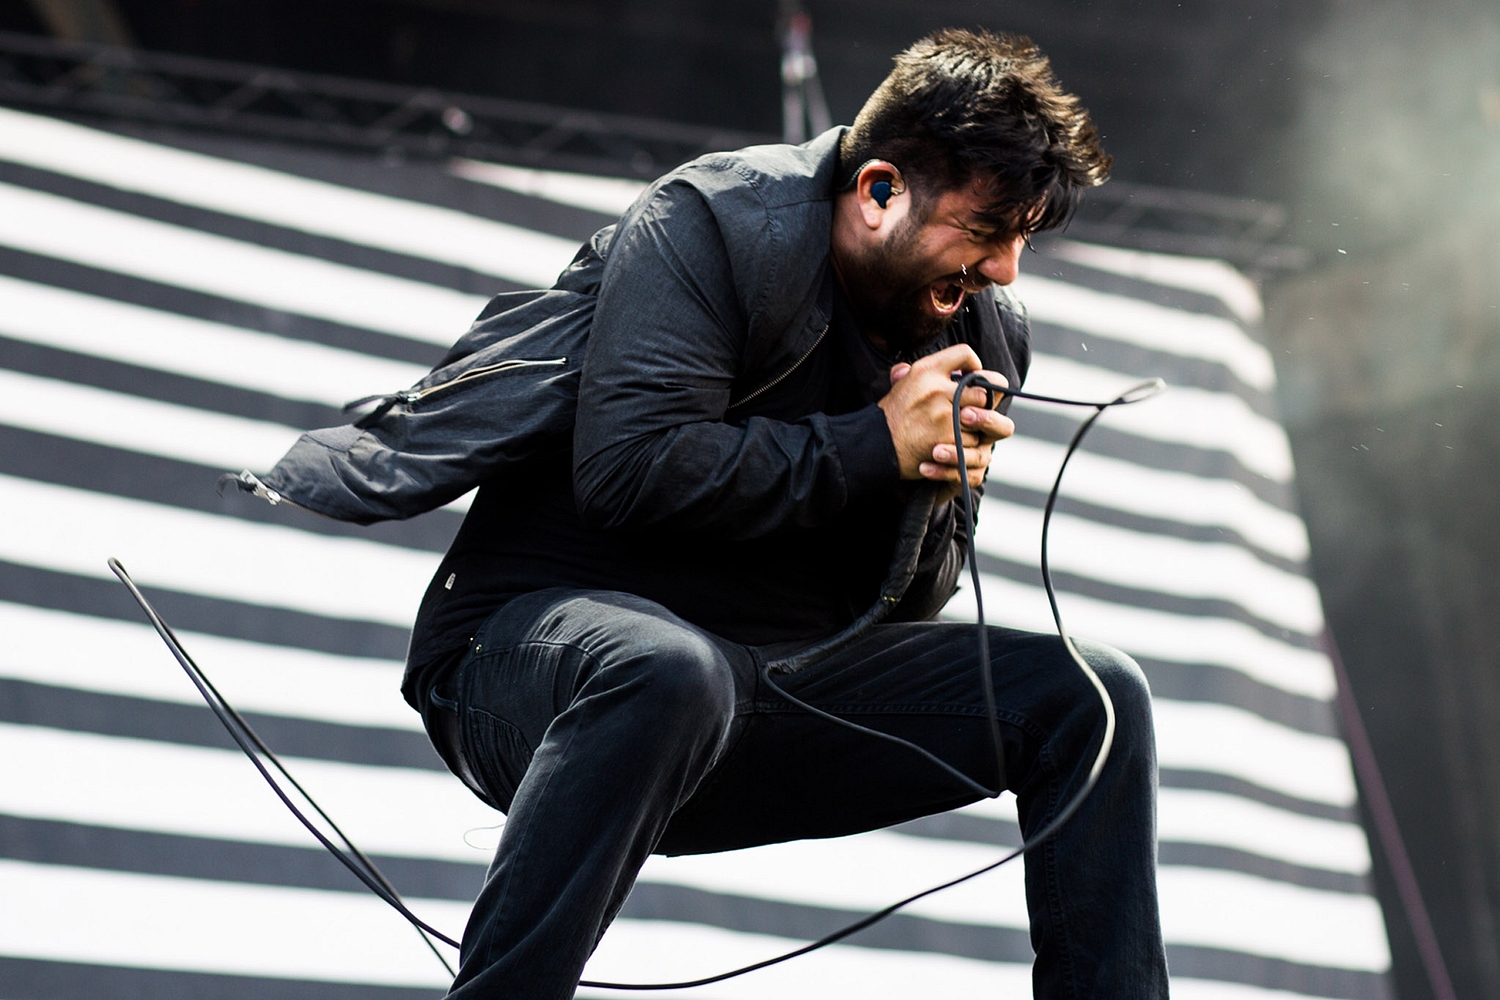 Deftones return with ‘Prayers/Triangles’ from new album ‘Gore’